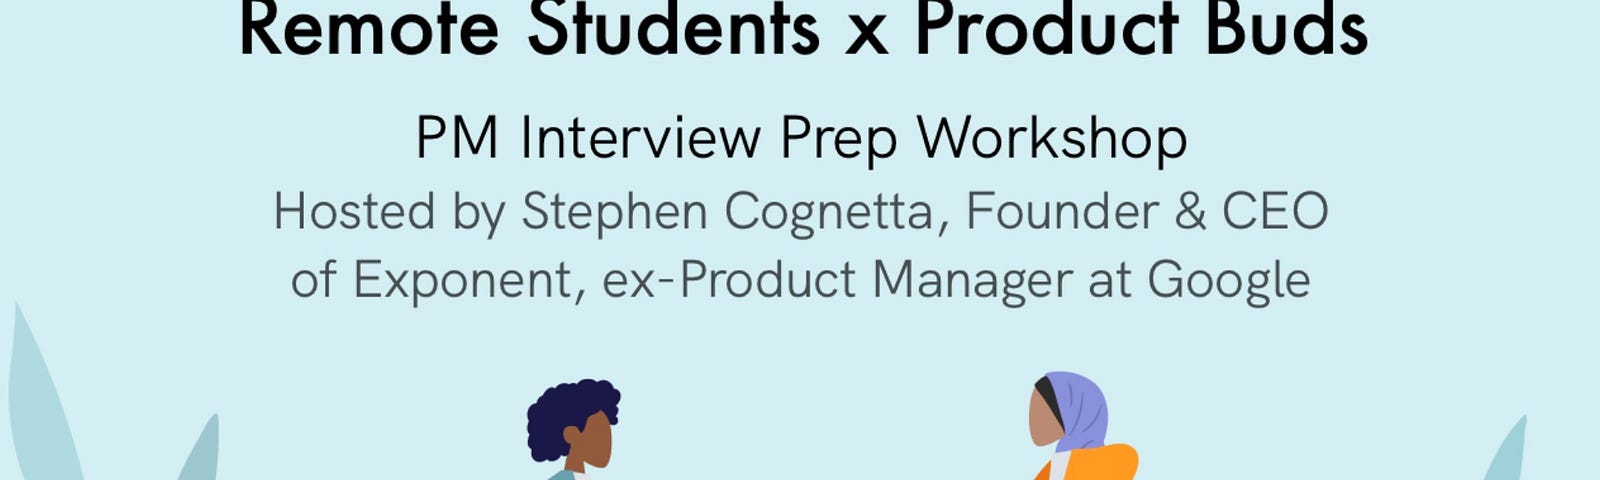 remote students x product buds pm interview prep workshop event cover photo